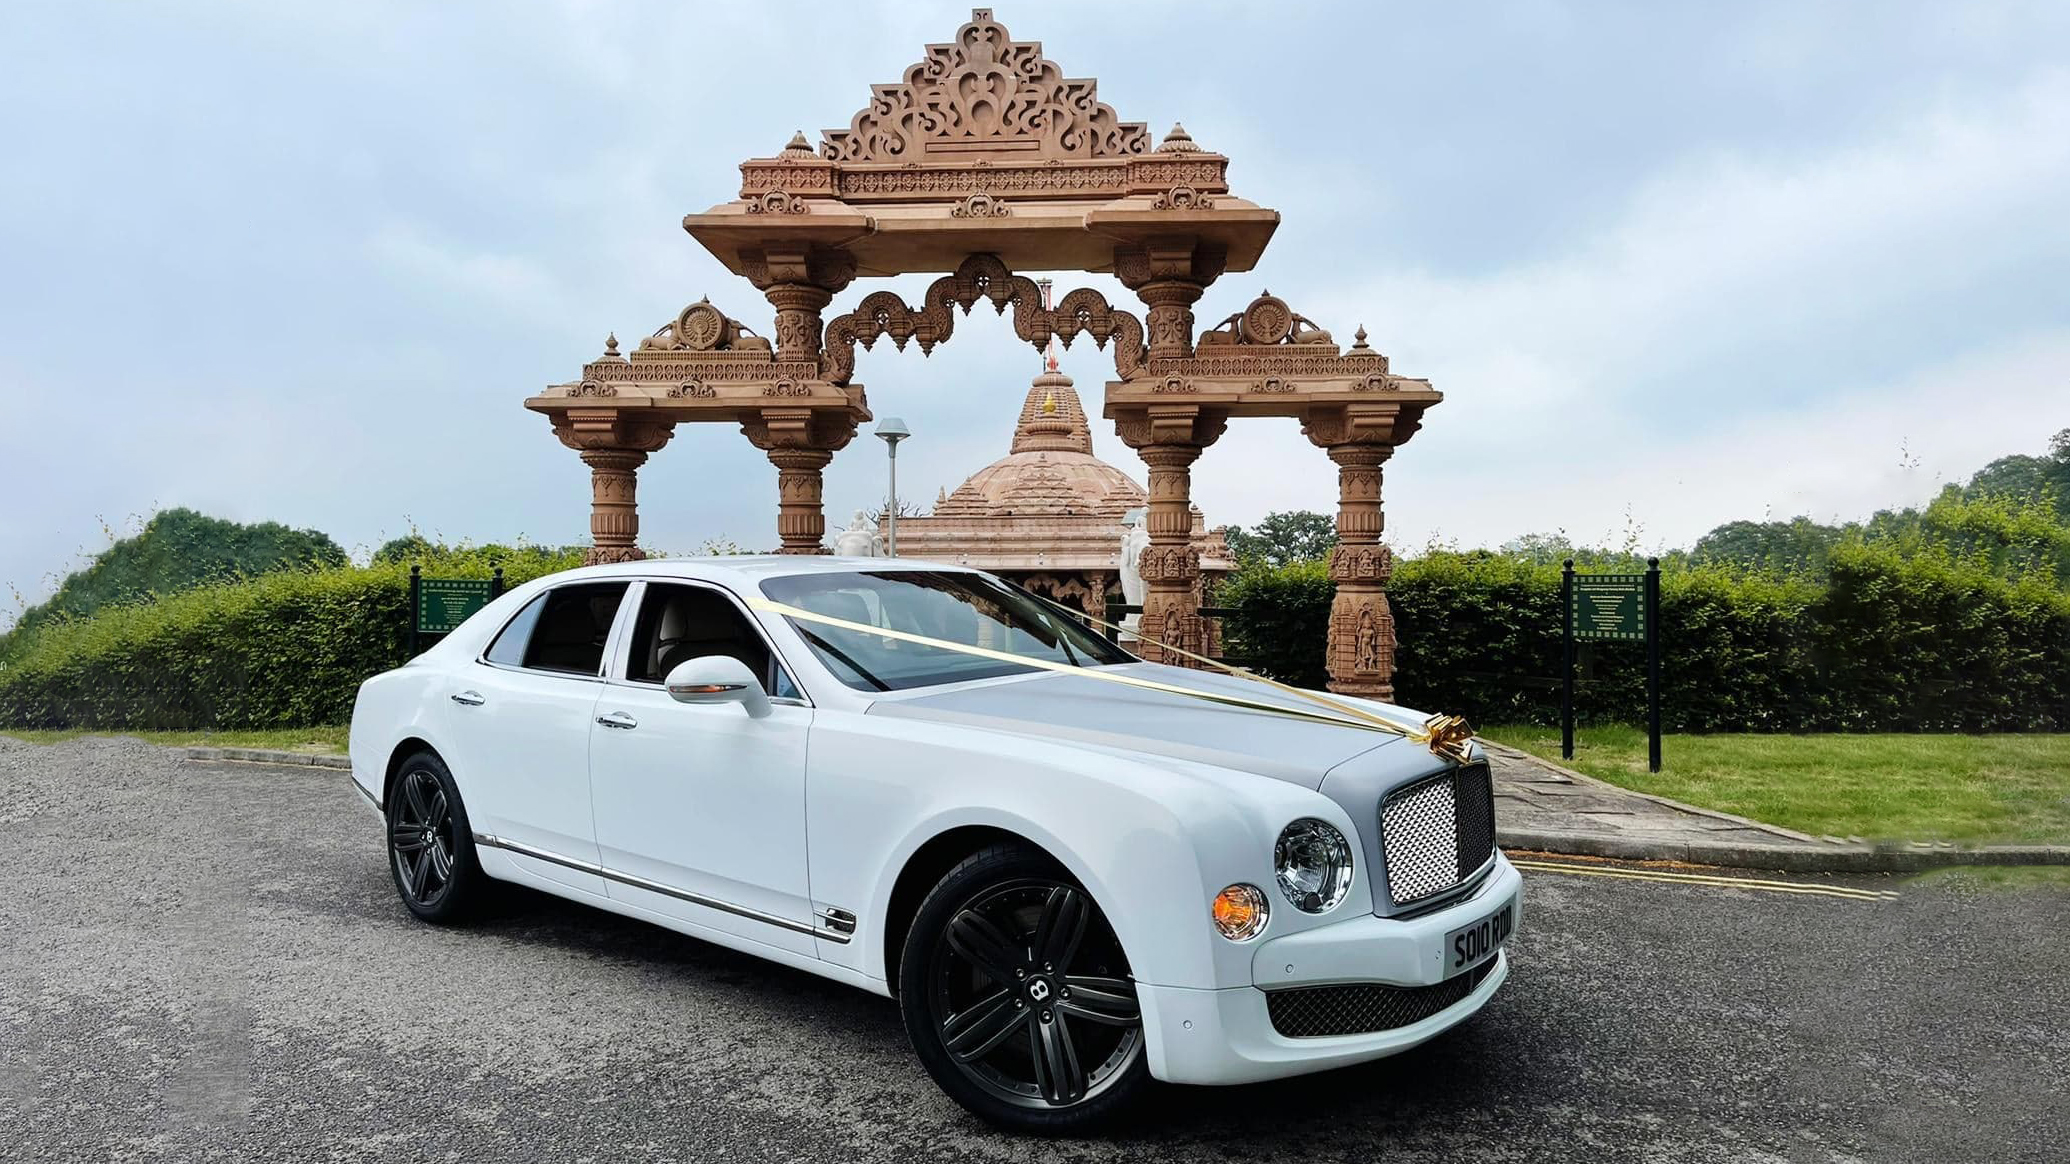 Modern Bentley Mulsanne with Black alloy wheels and Gold ribbons park in front of an Asian Temple in Peterborough.